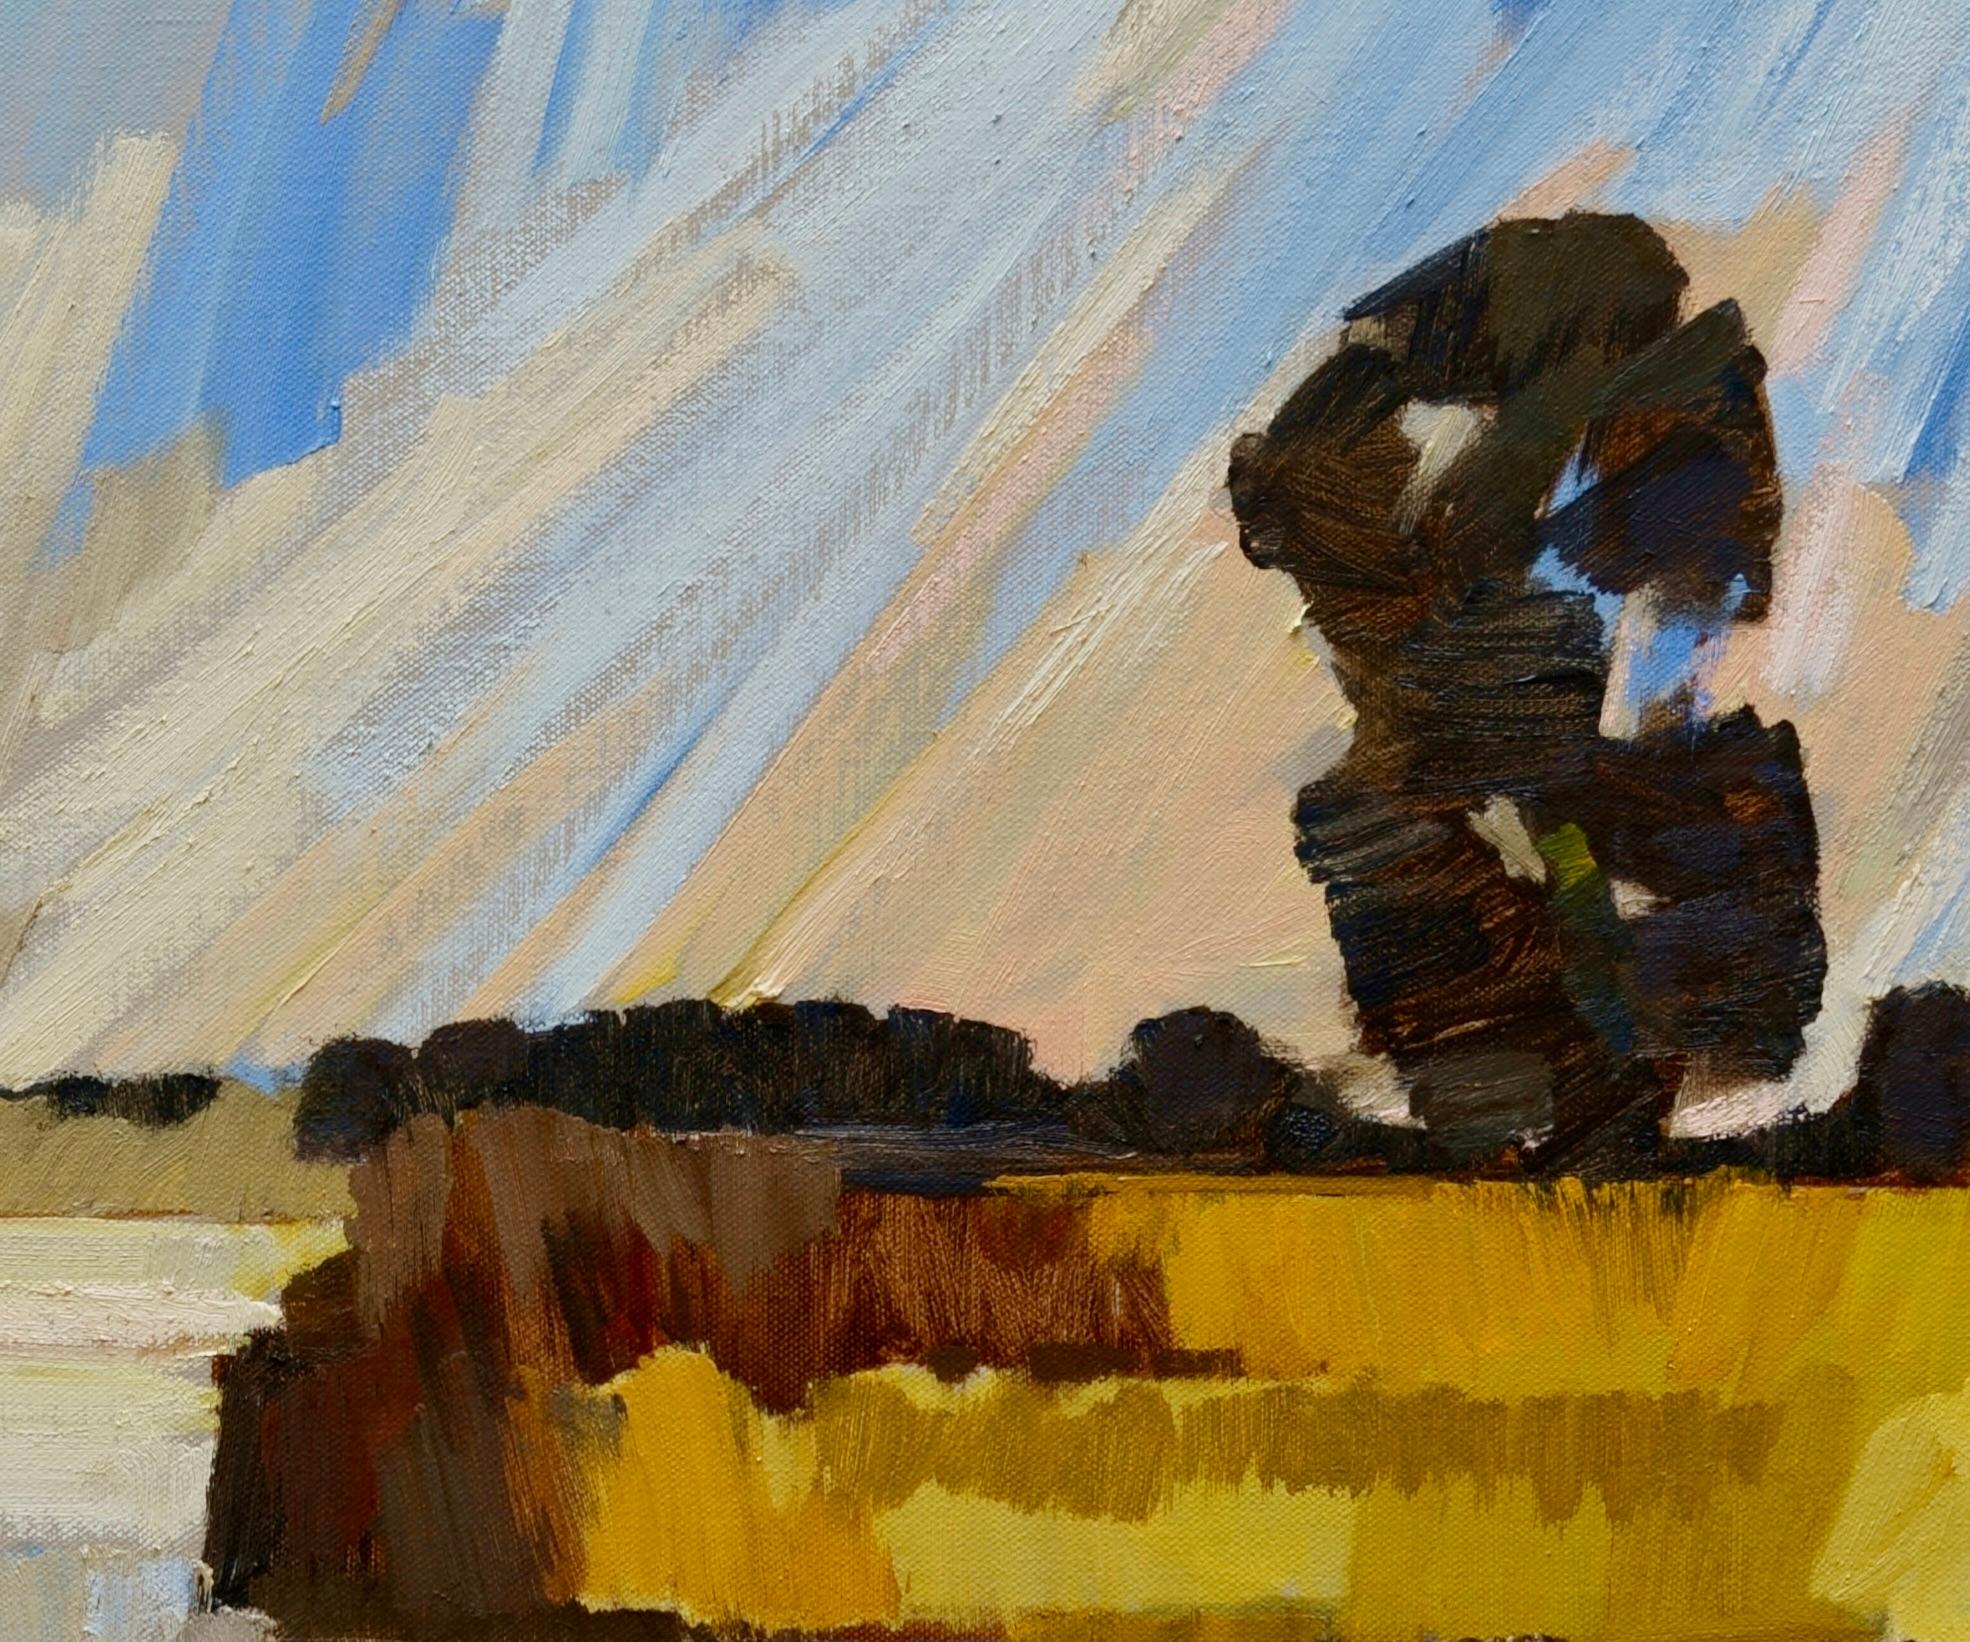 The Hurdle- 21st Century Contemporary Impressionistic Painting of a Landscape  - Brown Landscape Painting by Frank Dekkers